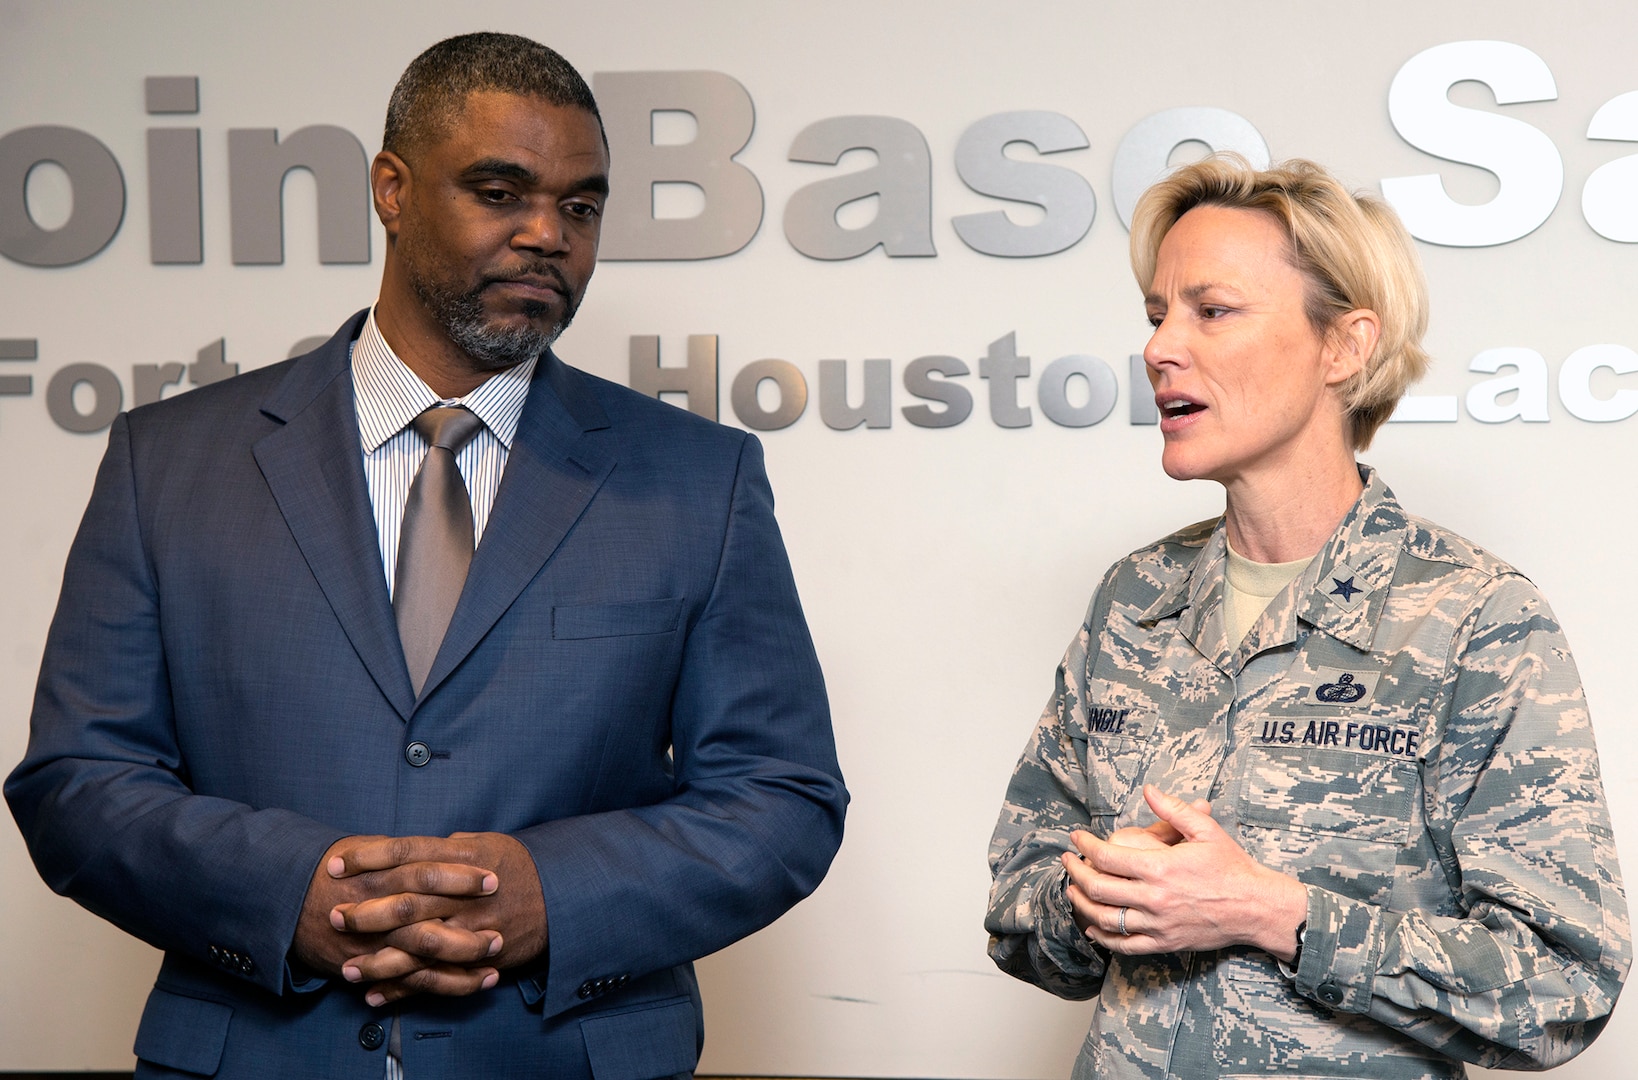 Brig. Gen. Heather Pringle (right), 502nd Air Base Wing and Joint Base San Antonio commander, thanks Garrick Williams (left), JBSA Energy Solutions director with CPS Energy, at the 502nd ABW headquarters at JBSA-Fort Sam Houston March 13, after he presented JBSA with a rebate check for $62,763.04.